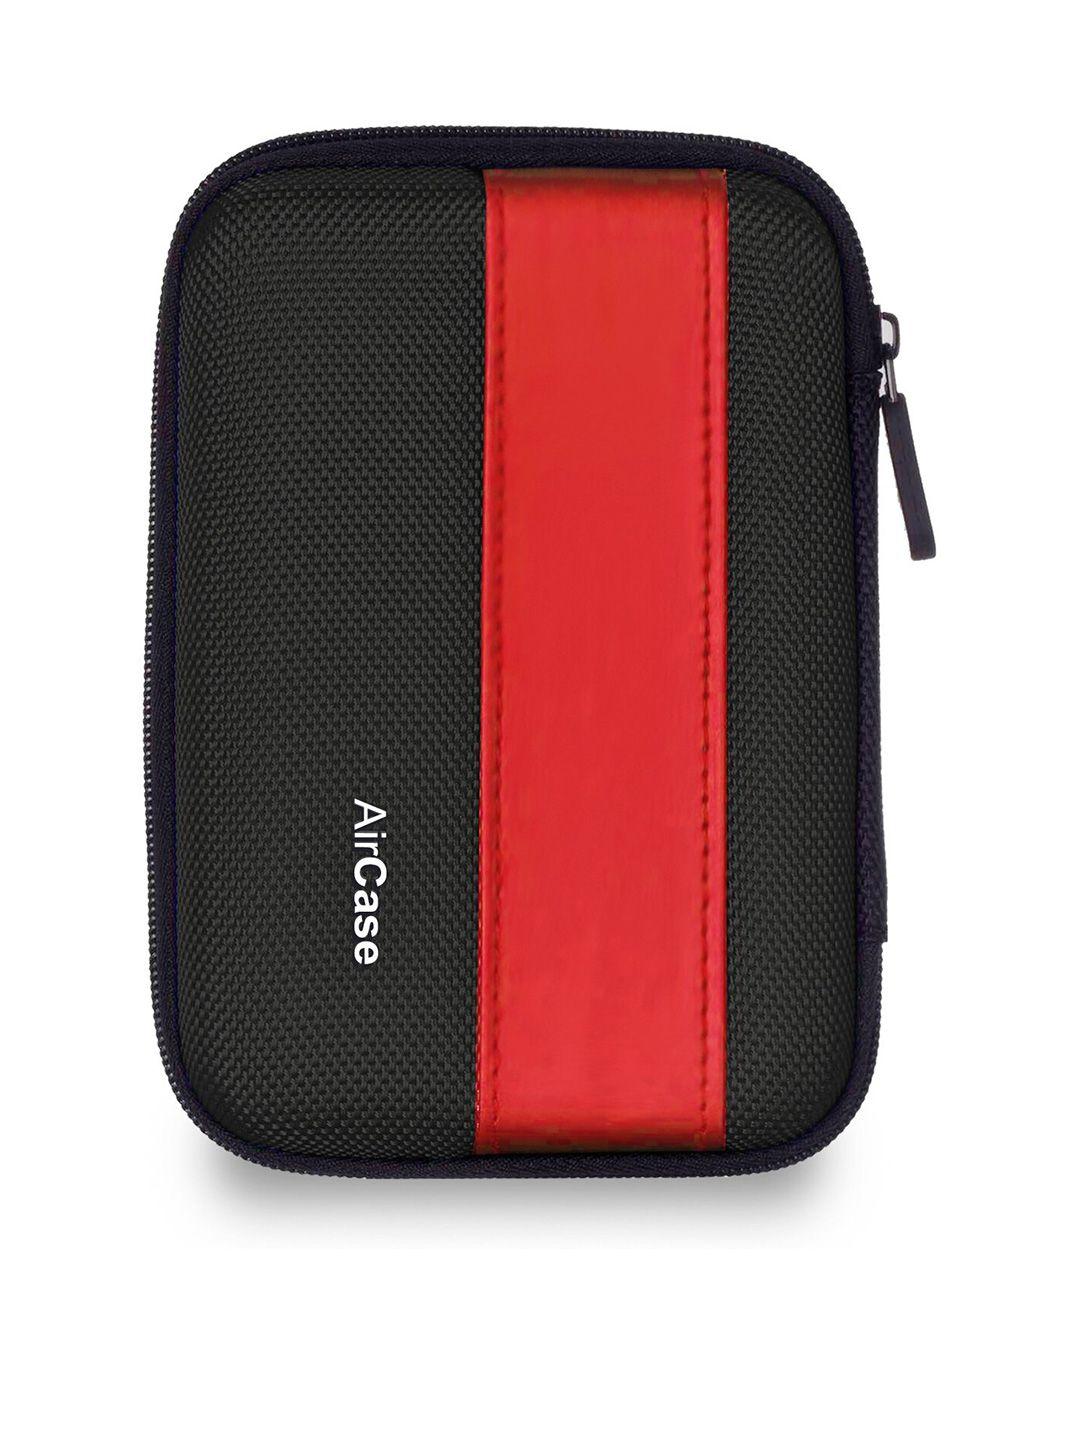 aircase-nylon-2.5-inch-water-resistance-hard-drive-case/cover